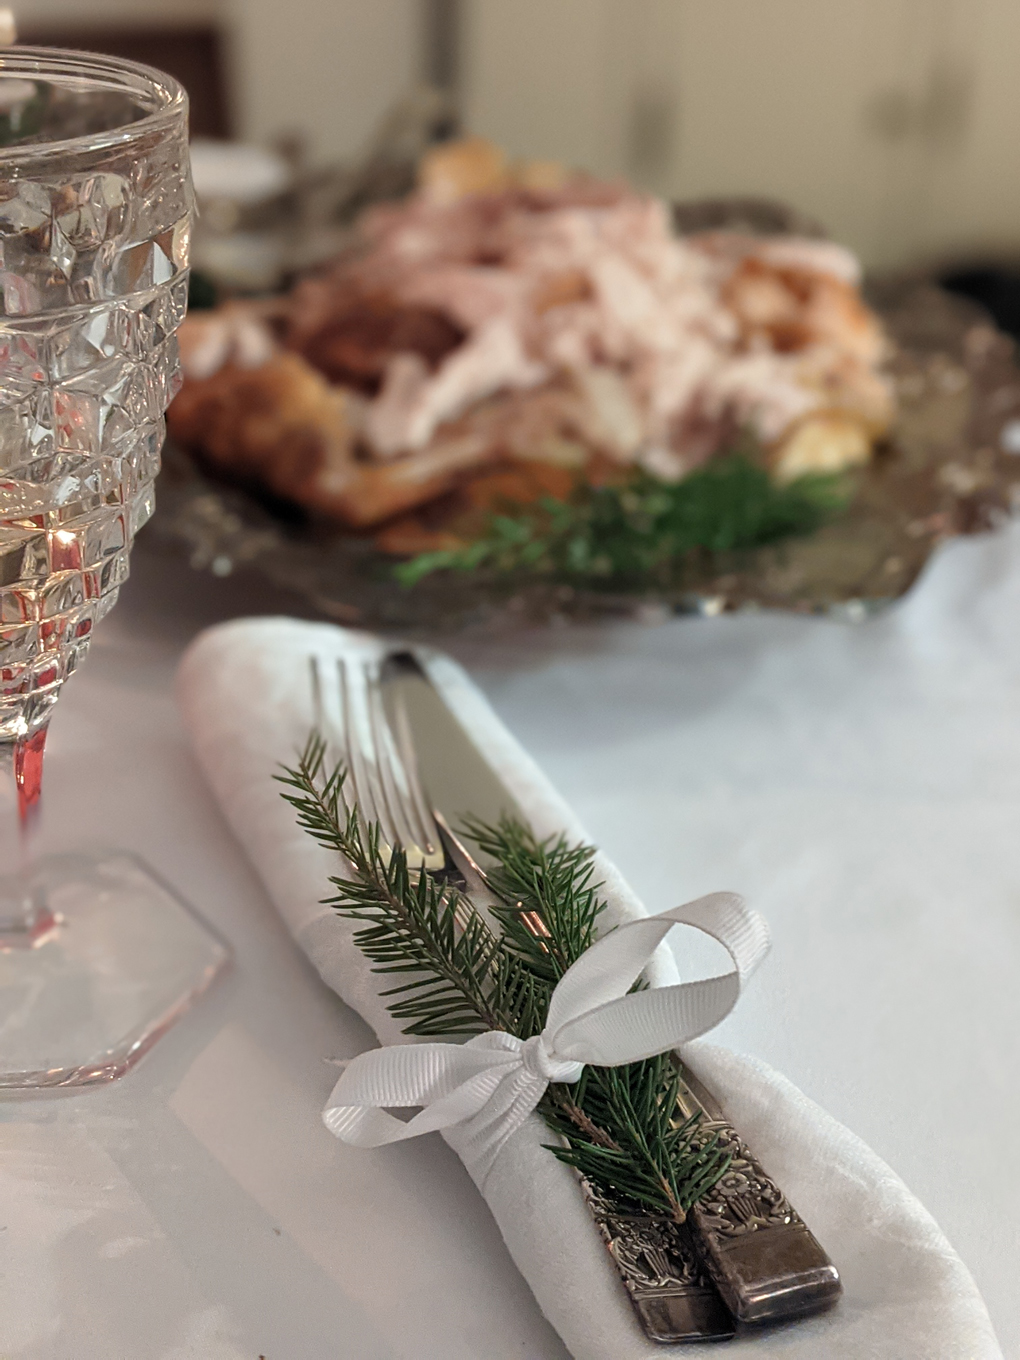 Cutlery wrapped in napkin with festive foliage, blurred platter of turkey in background